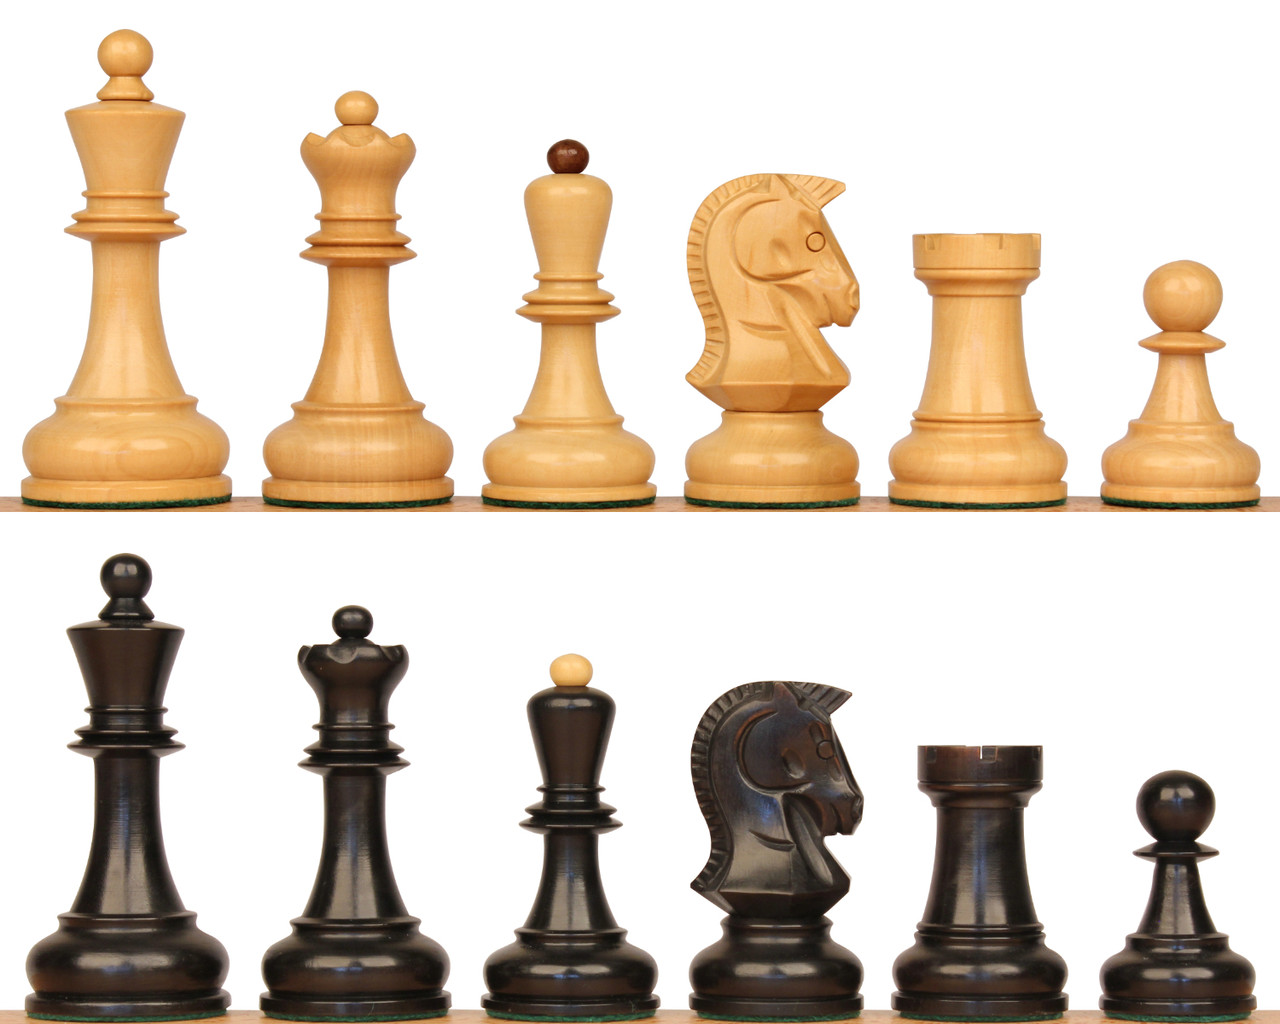 A game of chess has several kinds of pieces: pawns